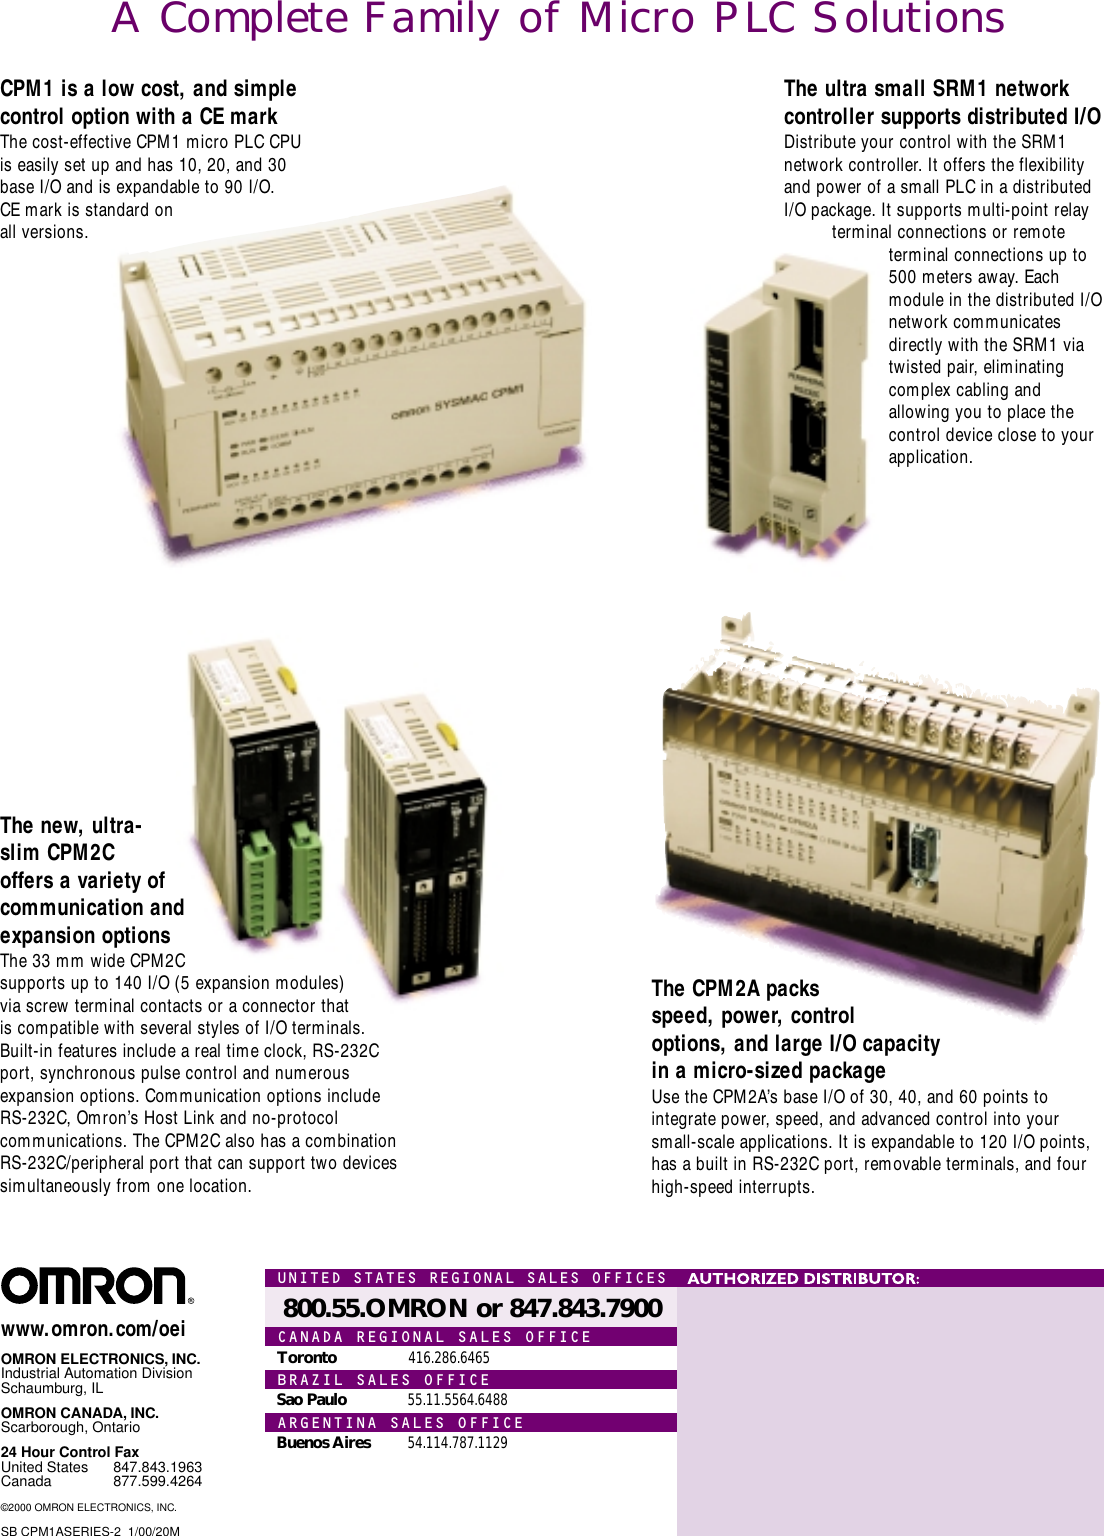 Page 6 of 6 - Omron Omron-Micro-Programmable-Controllers-Cpm1A-Users-Manual- *CPM1A Brochure 1.2K  Omron-micro-programmable-controllers-cpm1a-users-manual